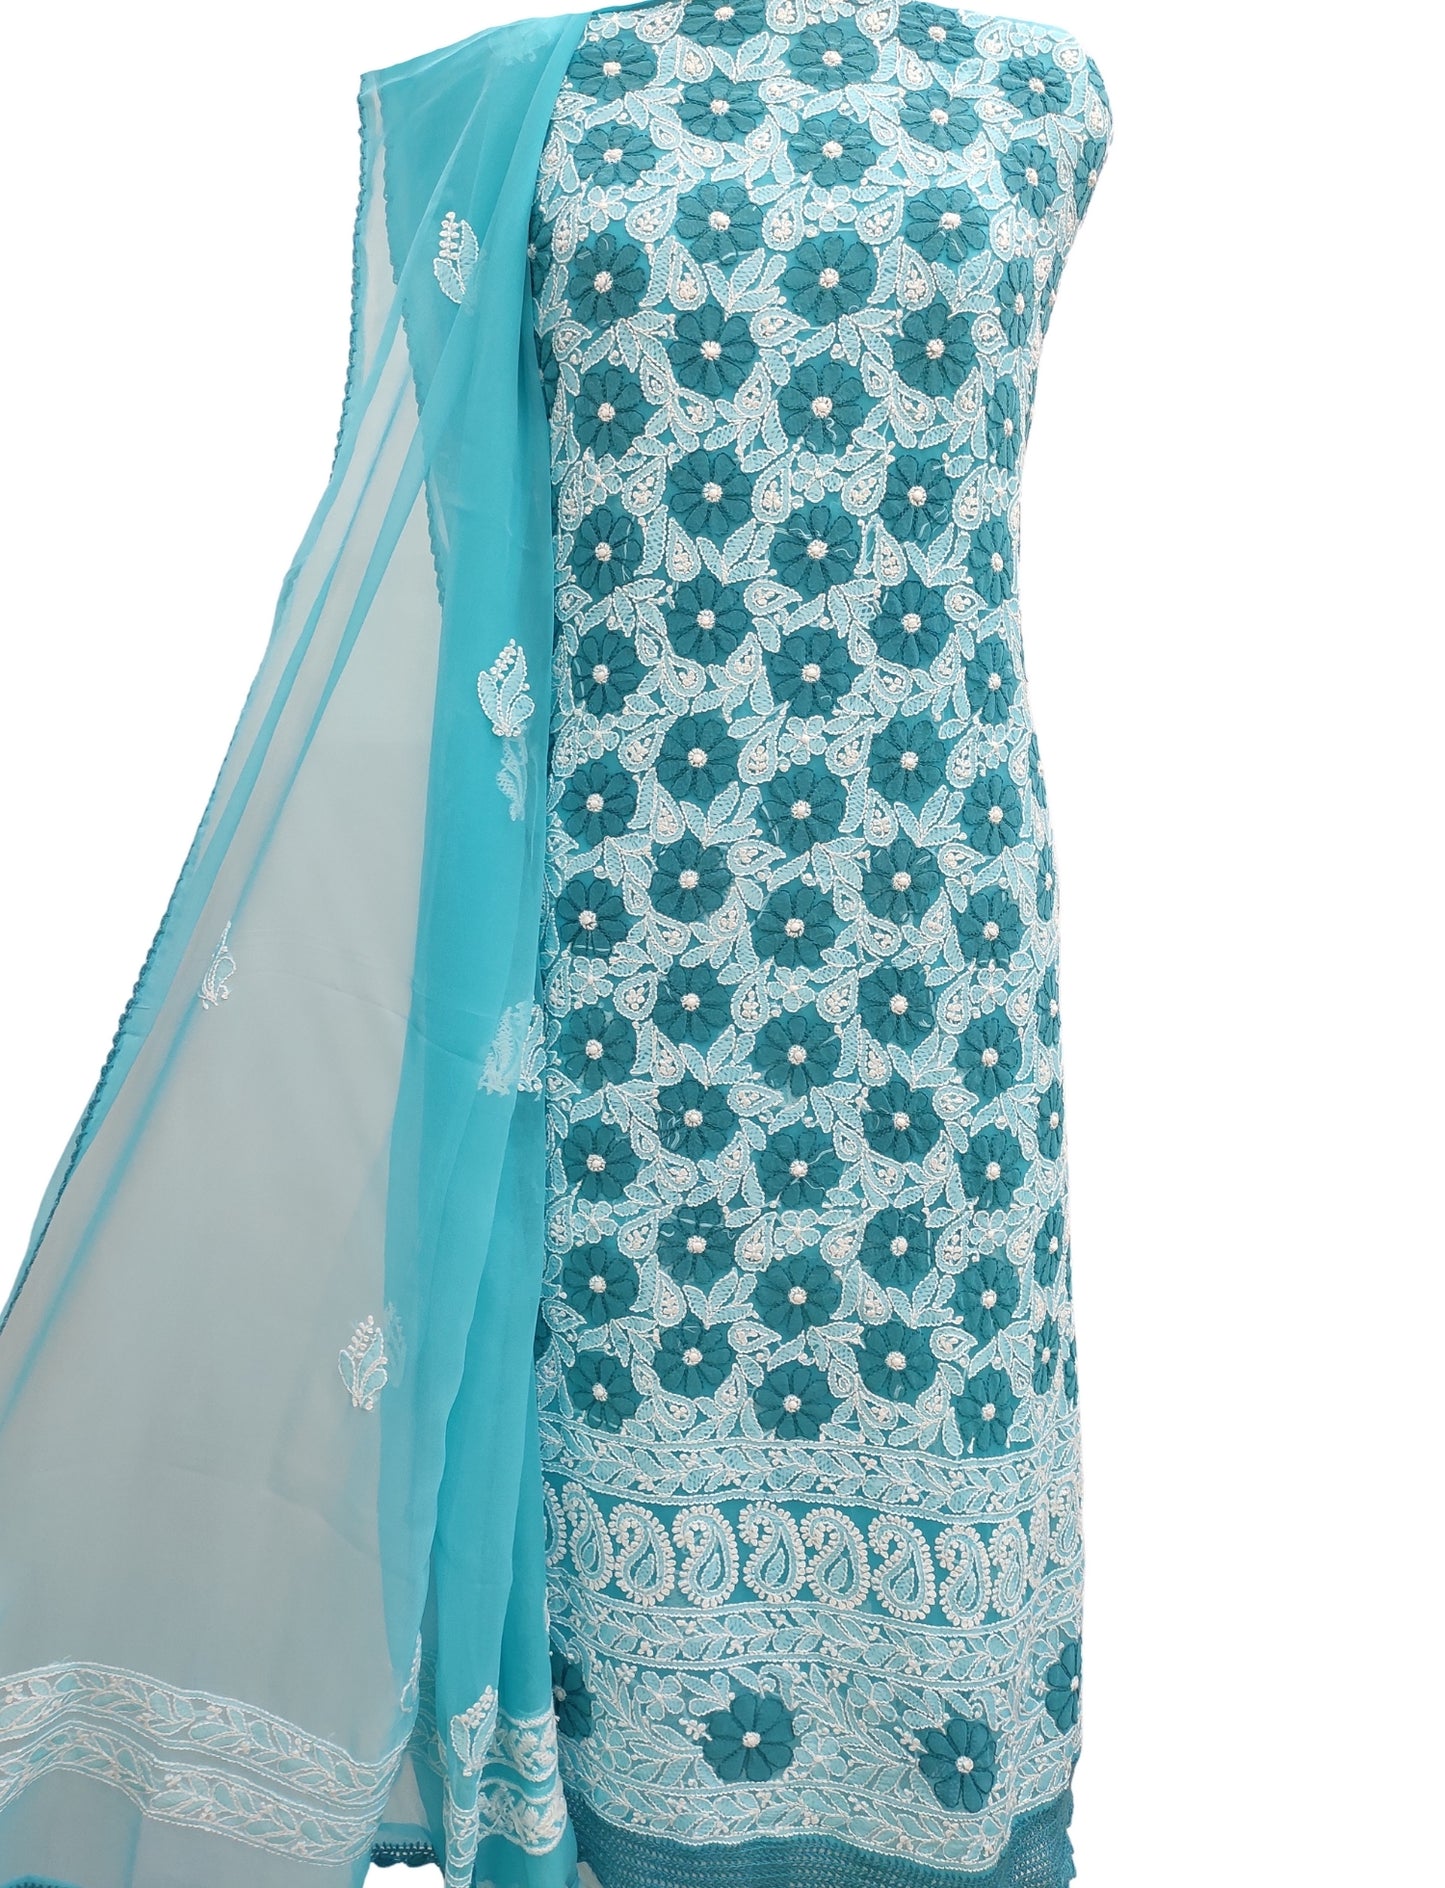 Shyamal Chikan Hand Embroidered Blue Georgette Lucknowi Chikankari Unstitched Suit Piece With Crosia Work - S10742 - Shyamal Chikan